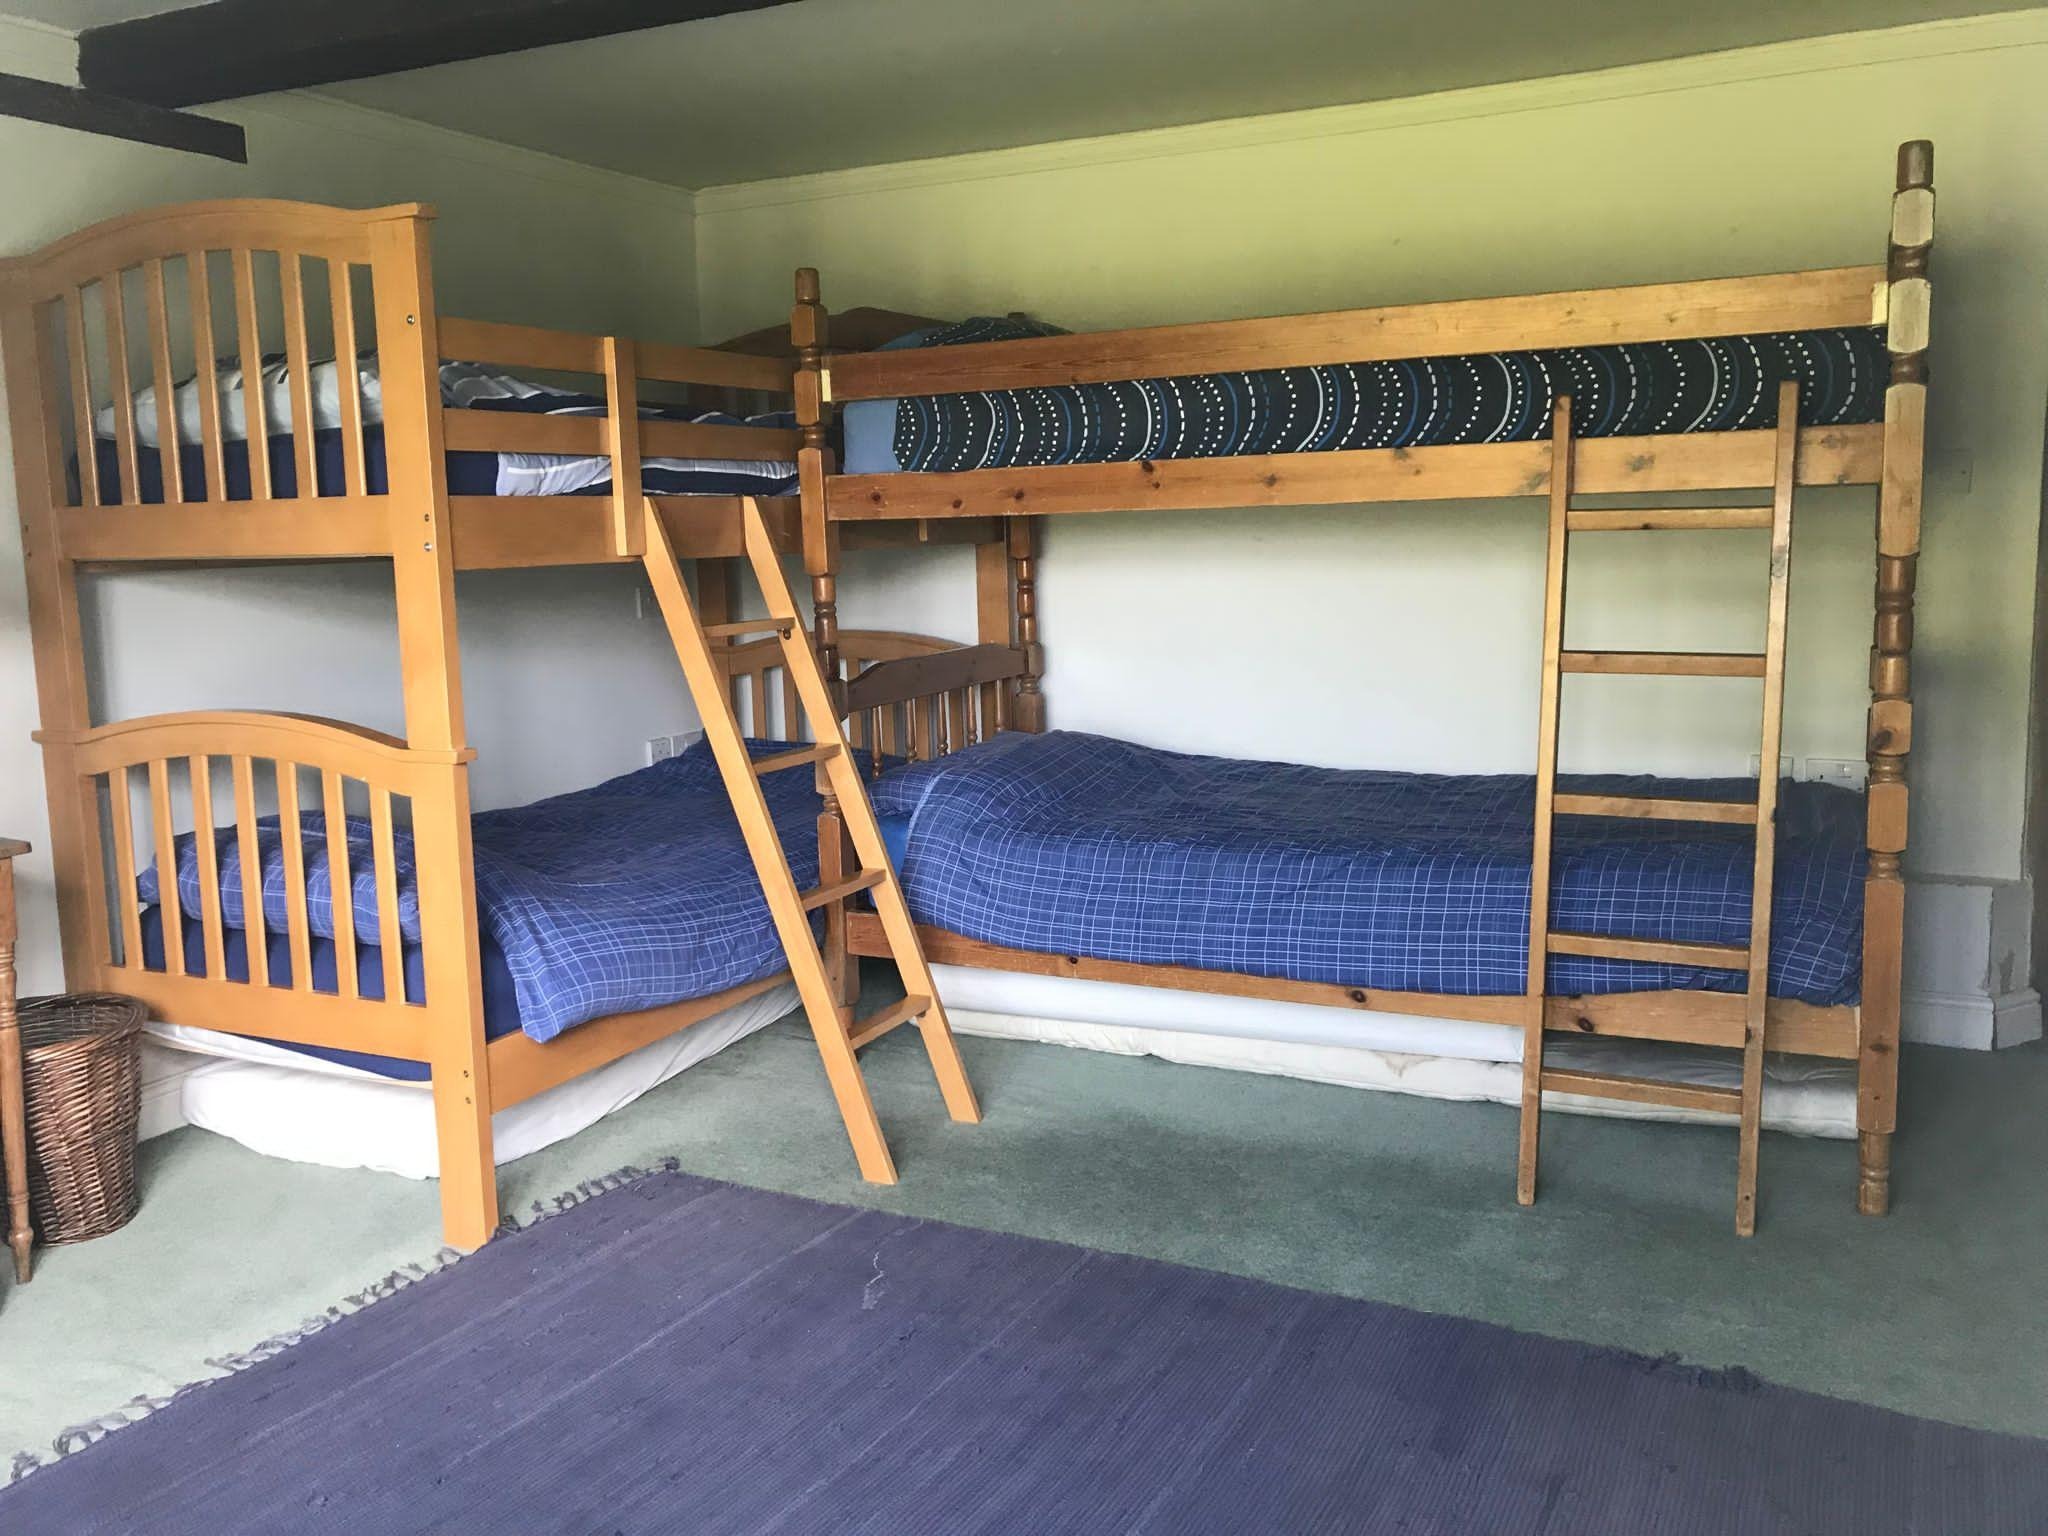 Bunk beds with two sets of bunks